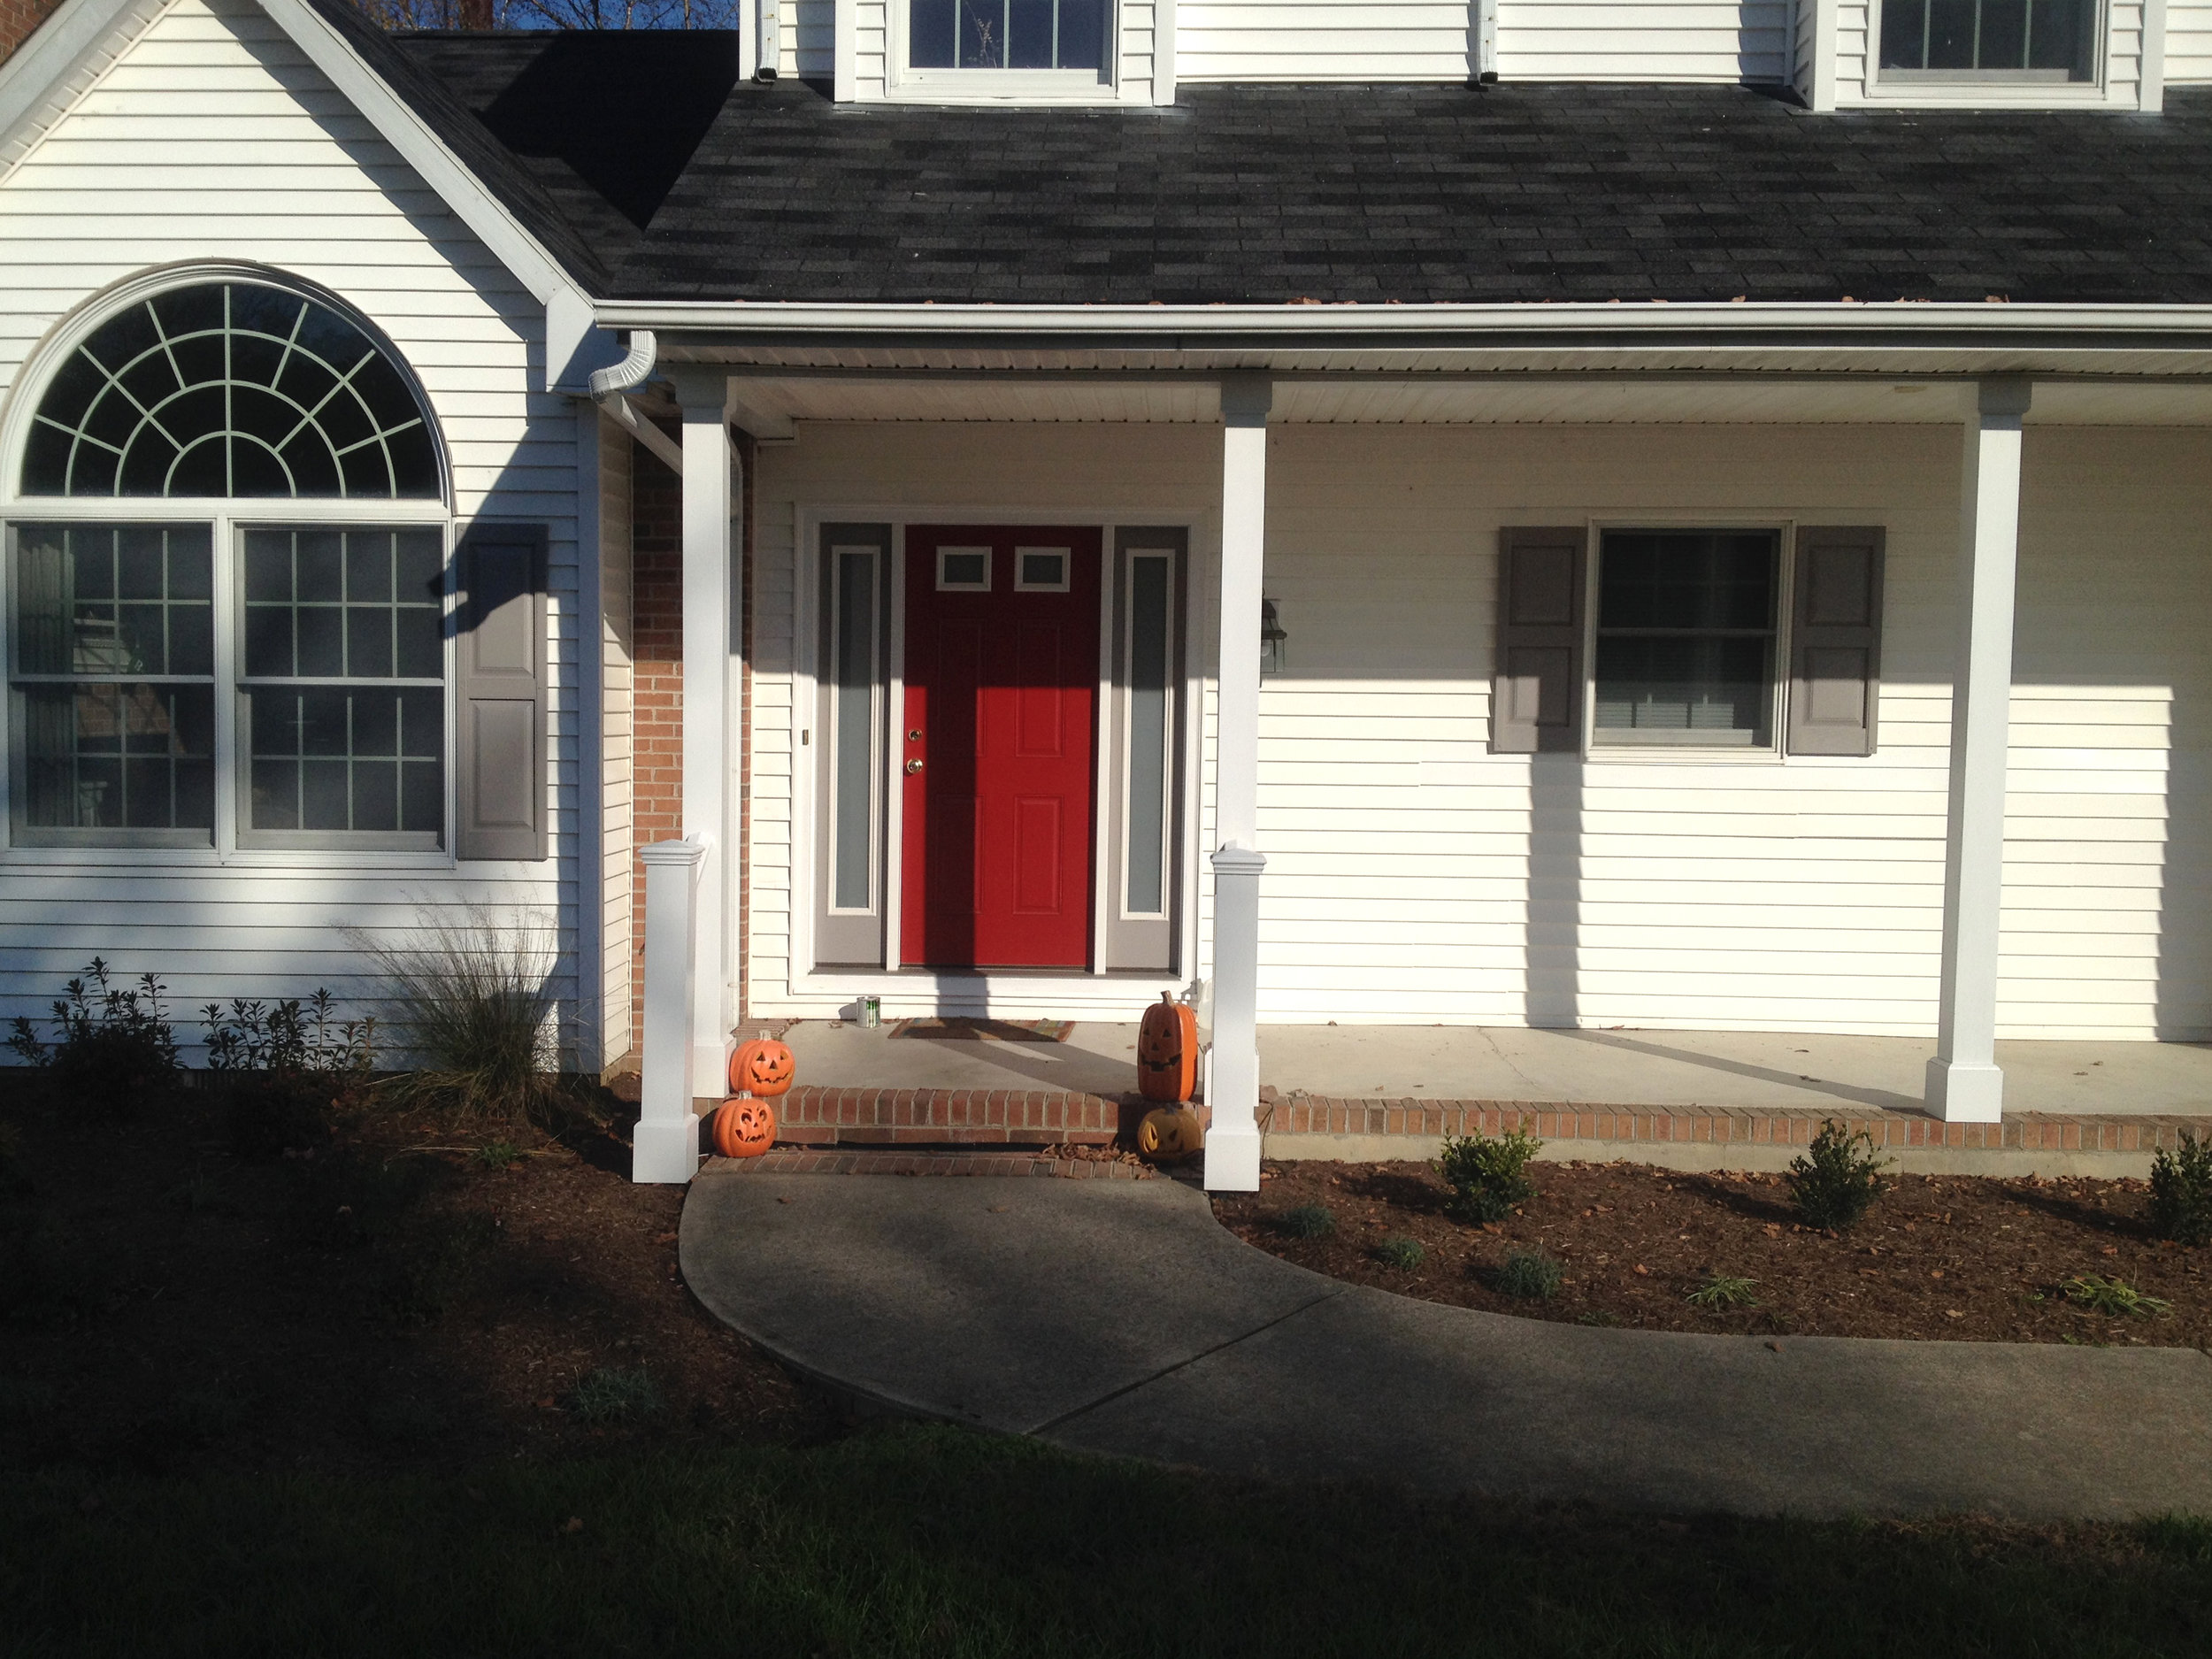  Recently remodeled front of the house. 